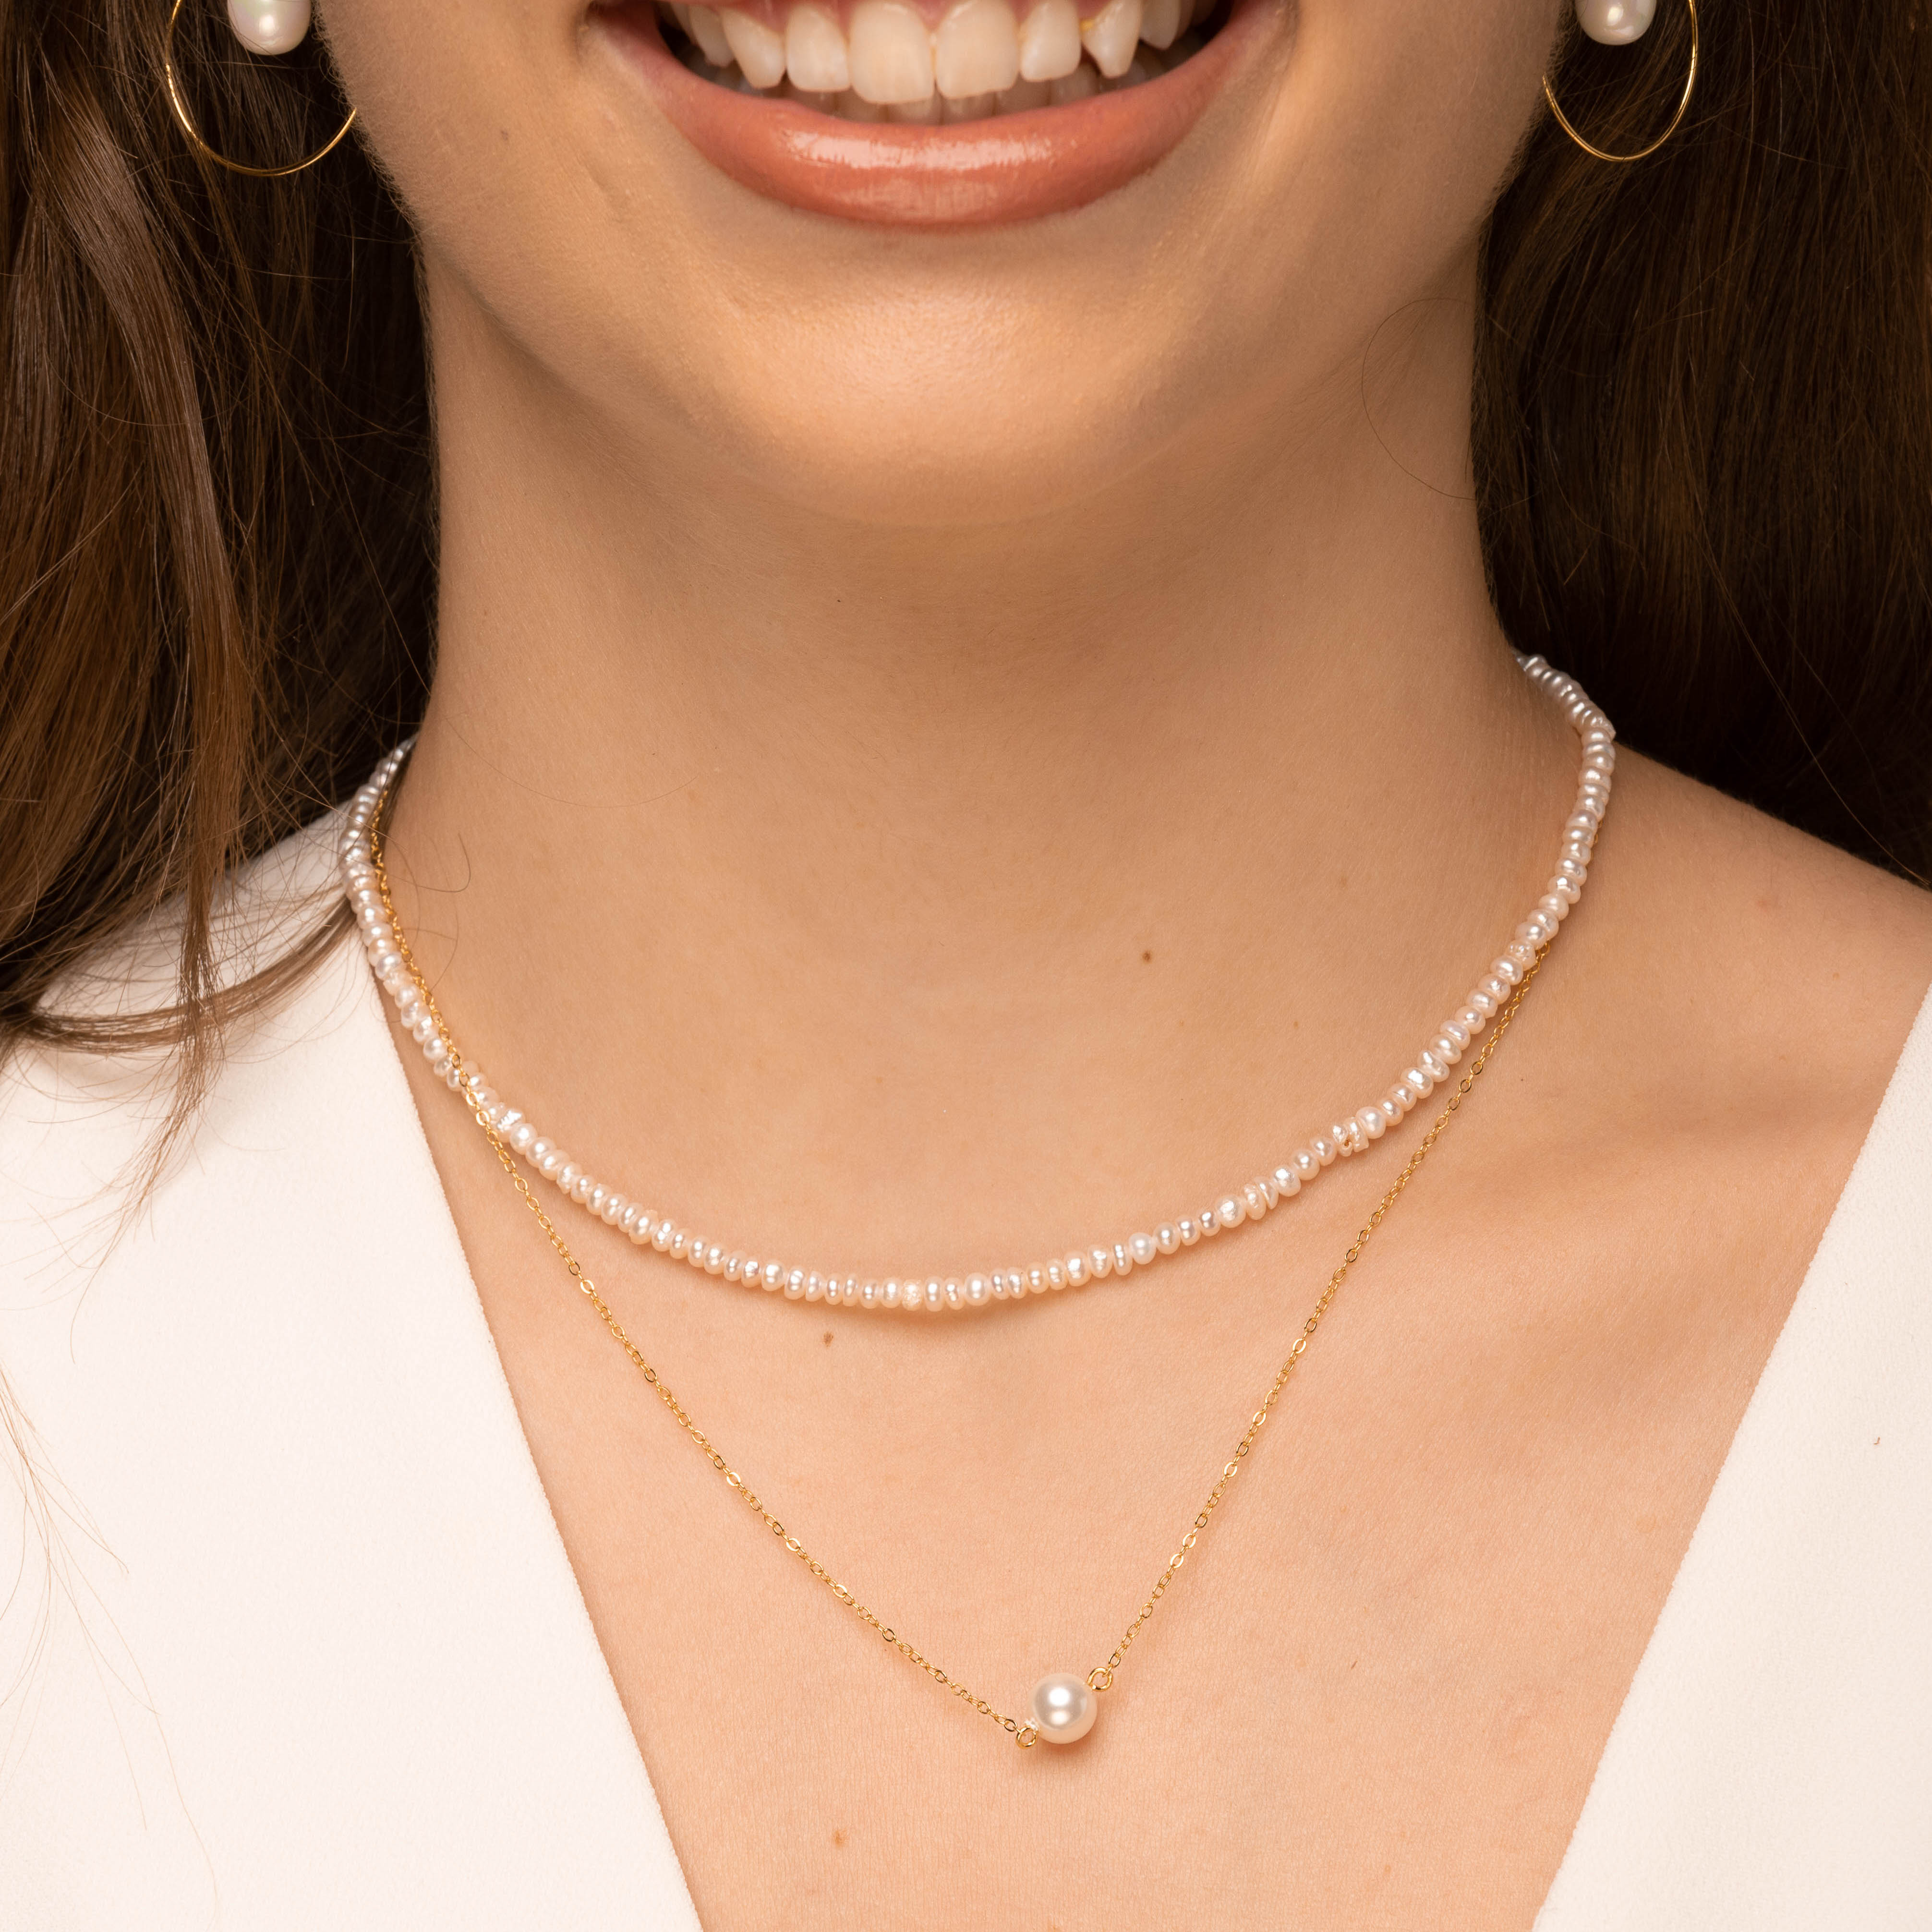 Free Gift - Freshwater Pearl Necklace